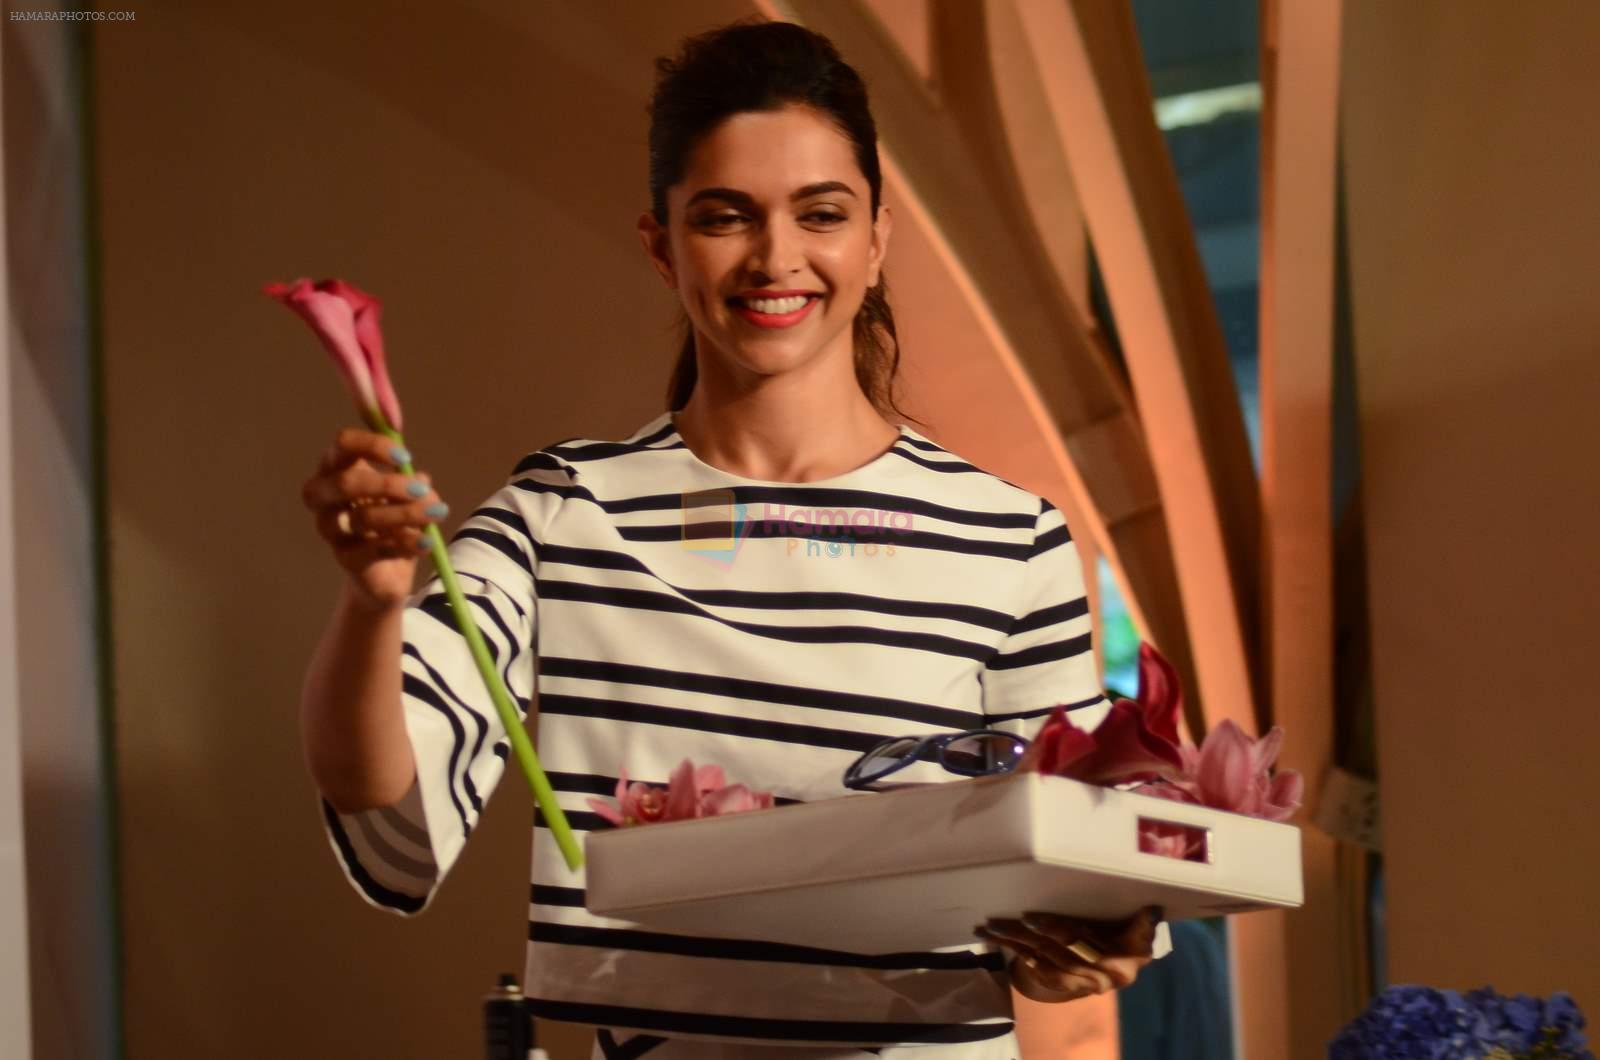 Deepika Padukone at Vogue launches its new capsule collection in Tote on 7th Aug 2015